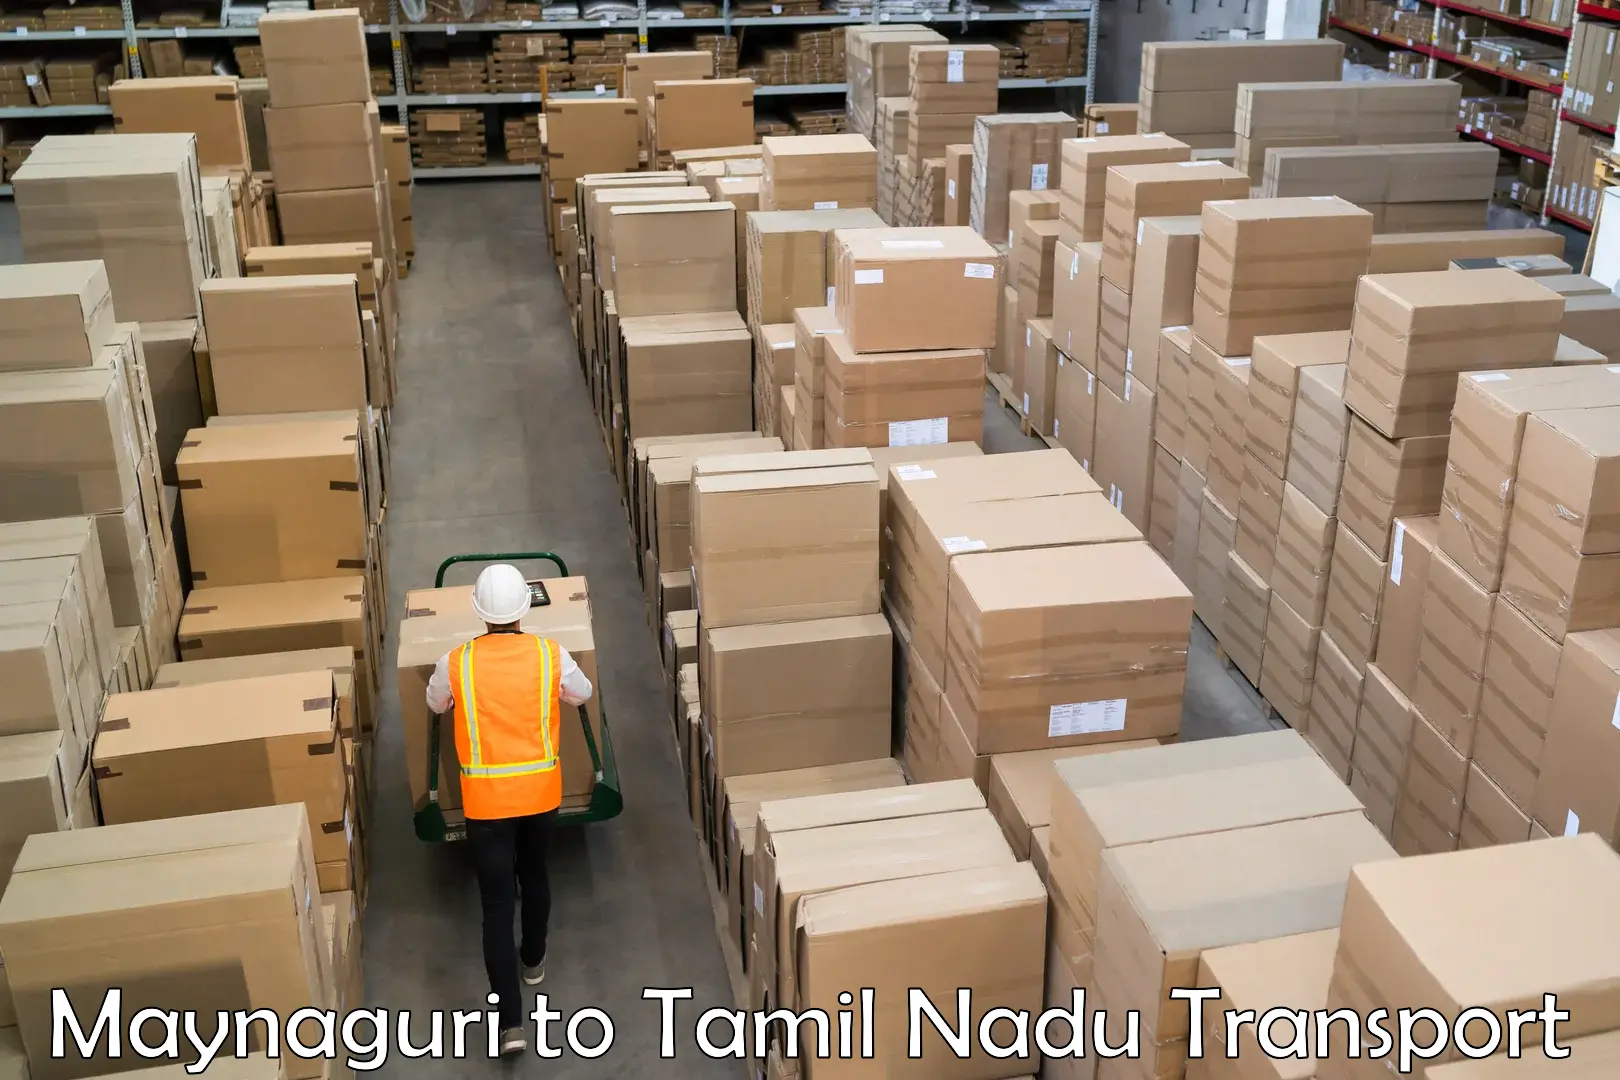 Shipping services Maynaguri to Saveetha Institute of Medical and Technical Sciences Chennai